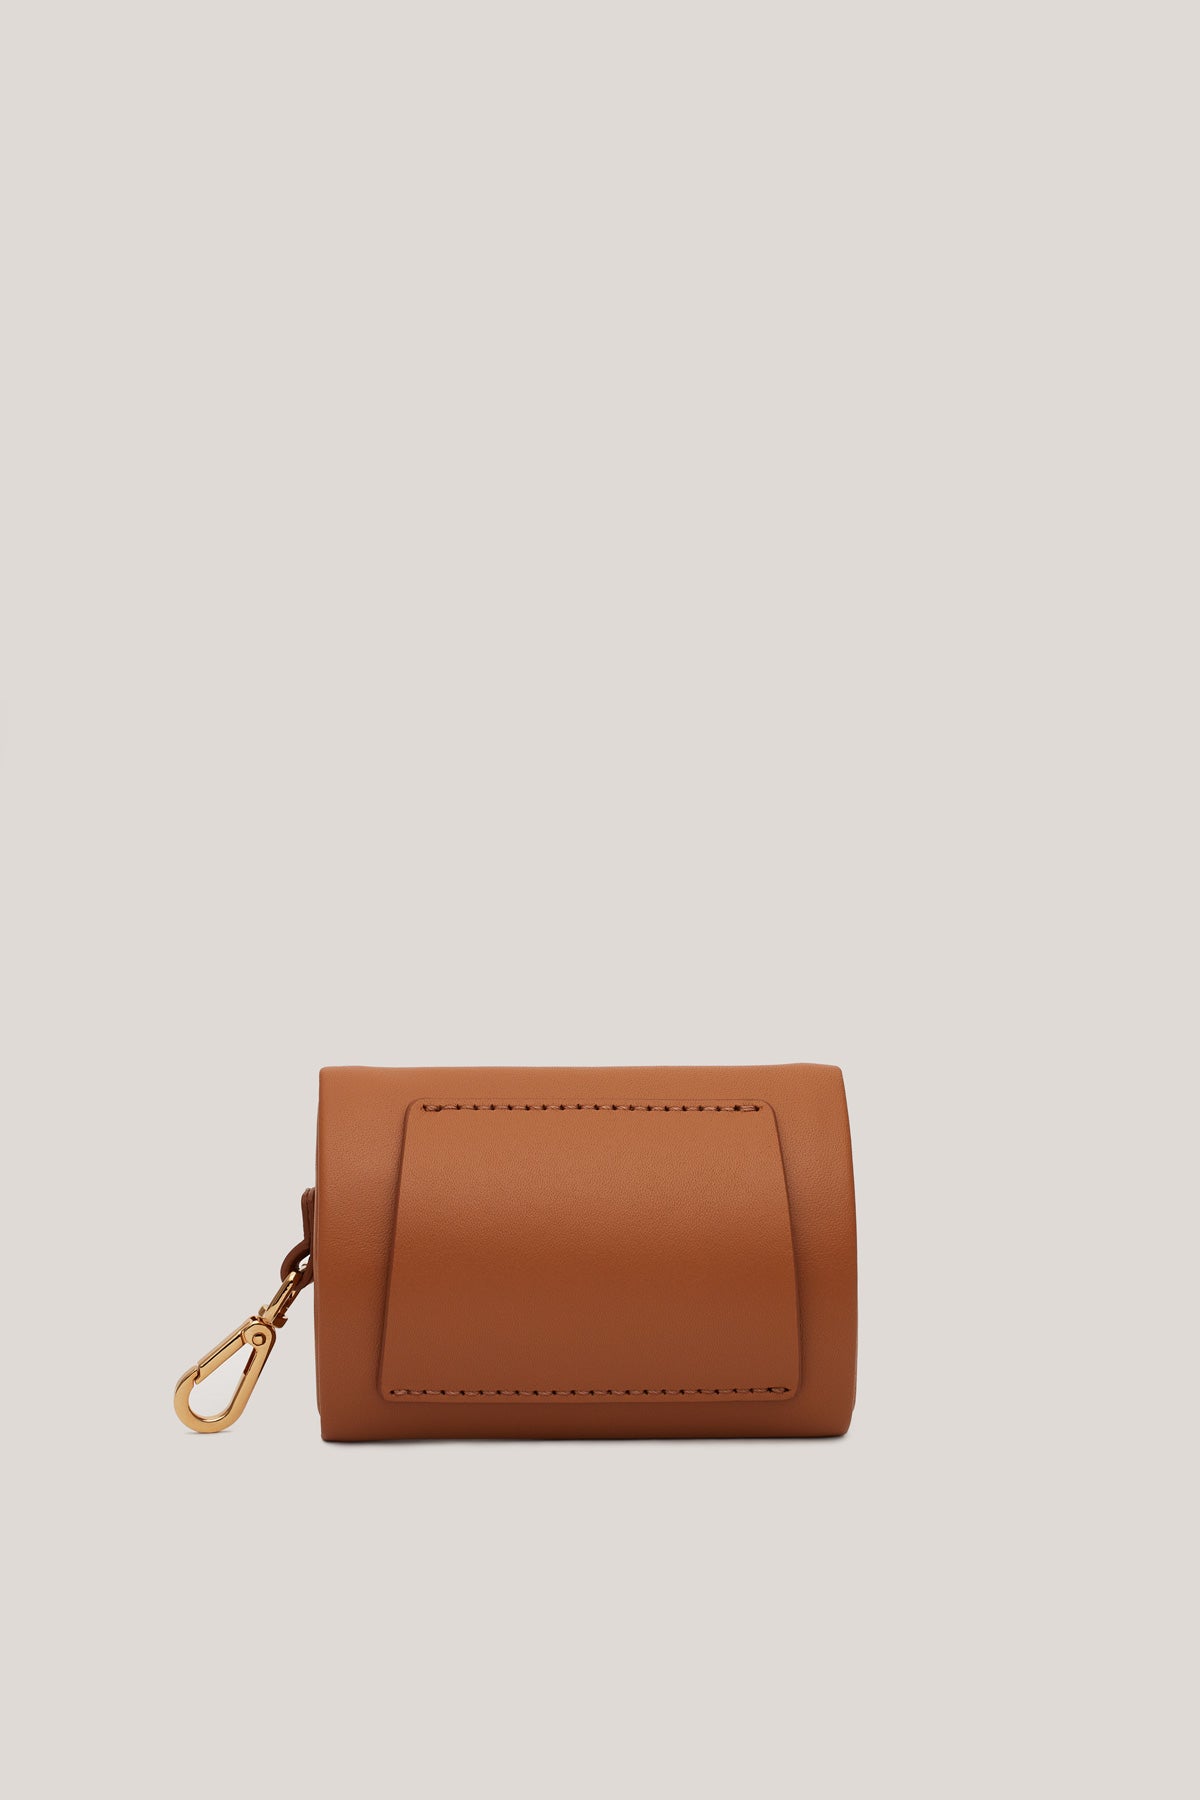 Didi carmelo is an elegant caramel color handbag from Italy and made of quality leather.